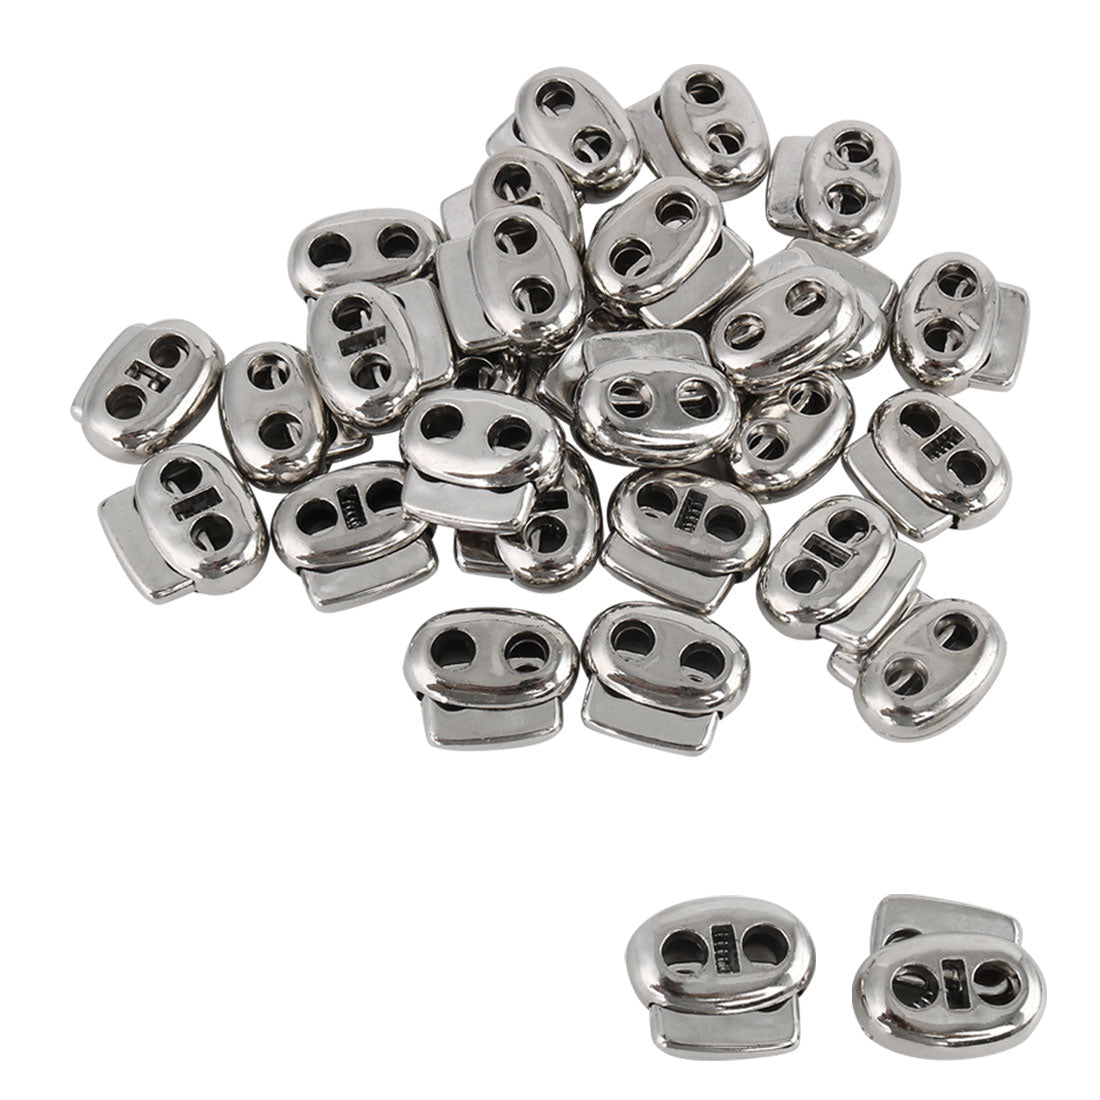 uxcell Uxcell 25pcs Plastic Spring Cord Locks Double Hole End Rope Toggle Fastener Silver Tone